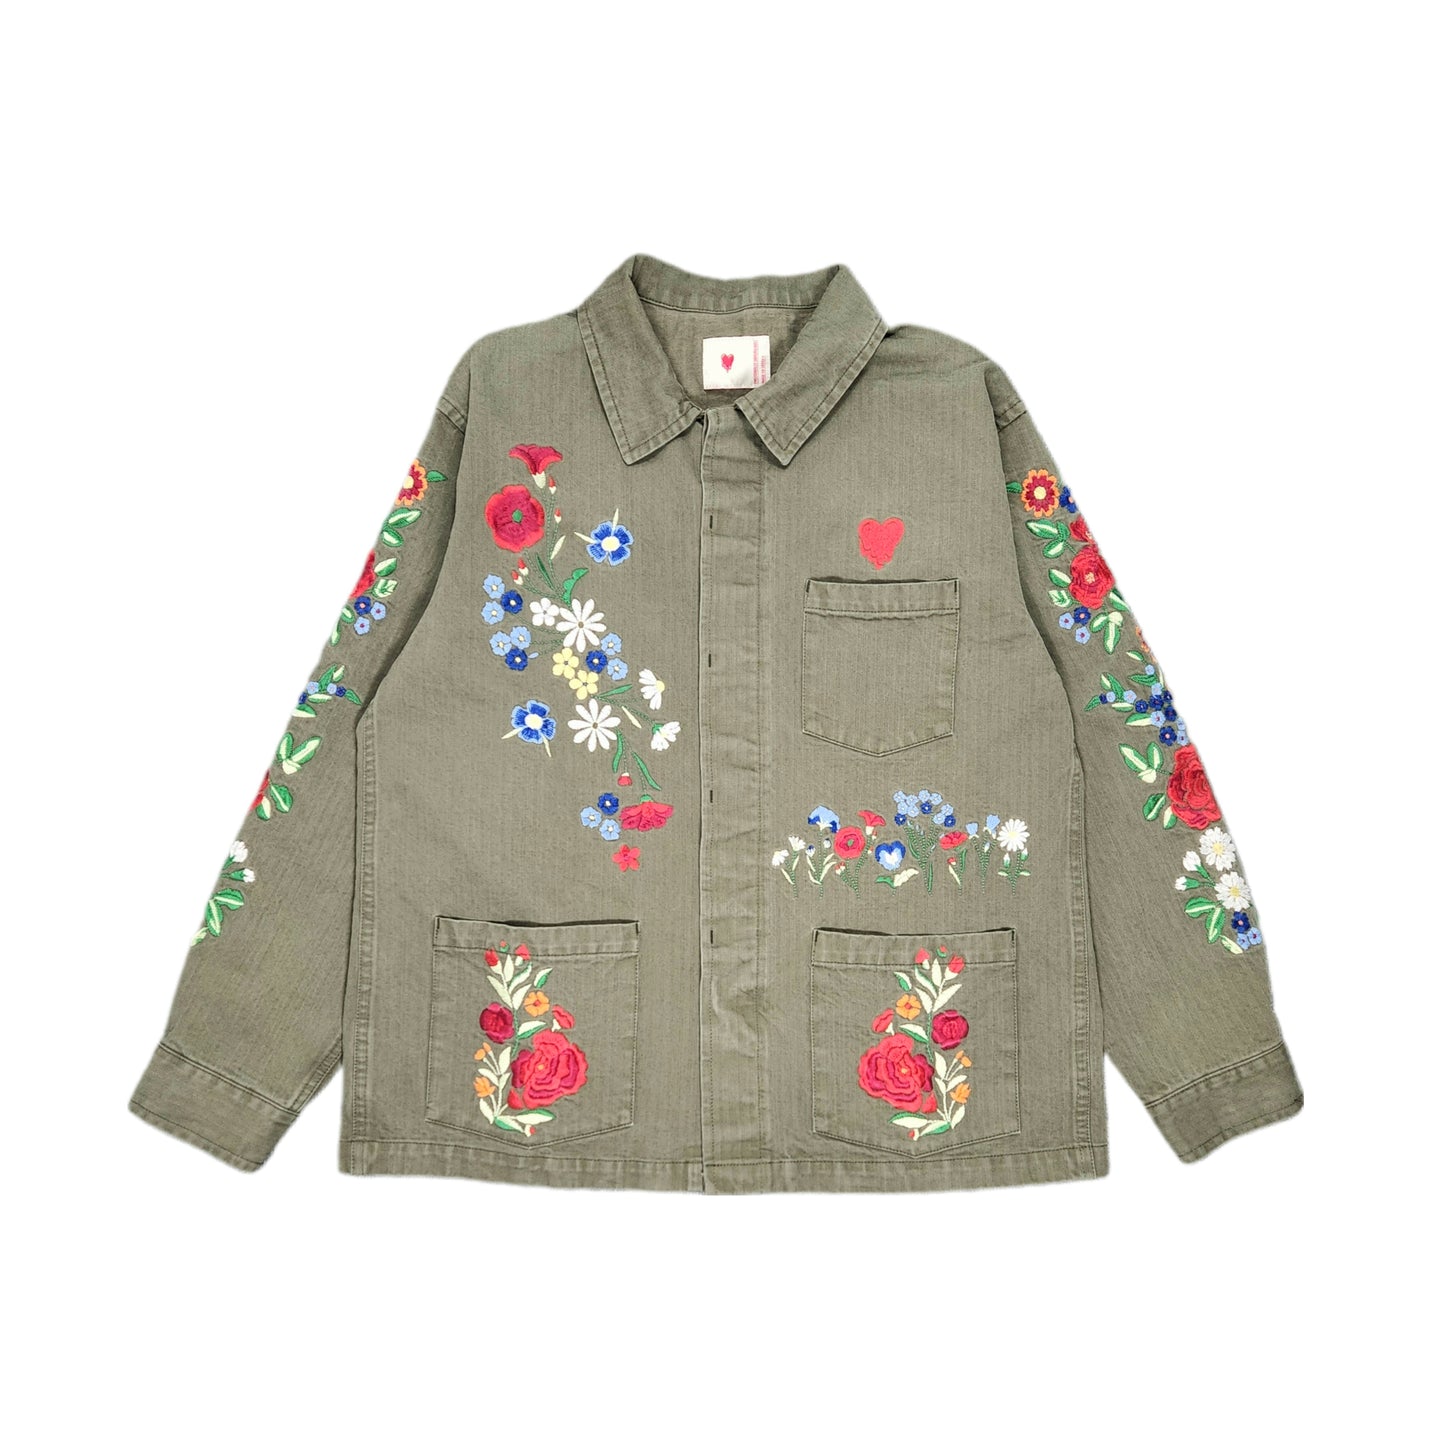 FRORAL WORK JACKET